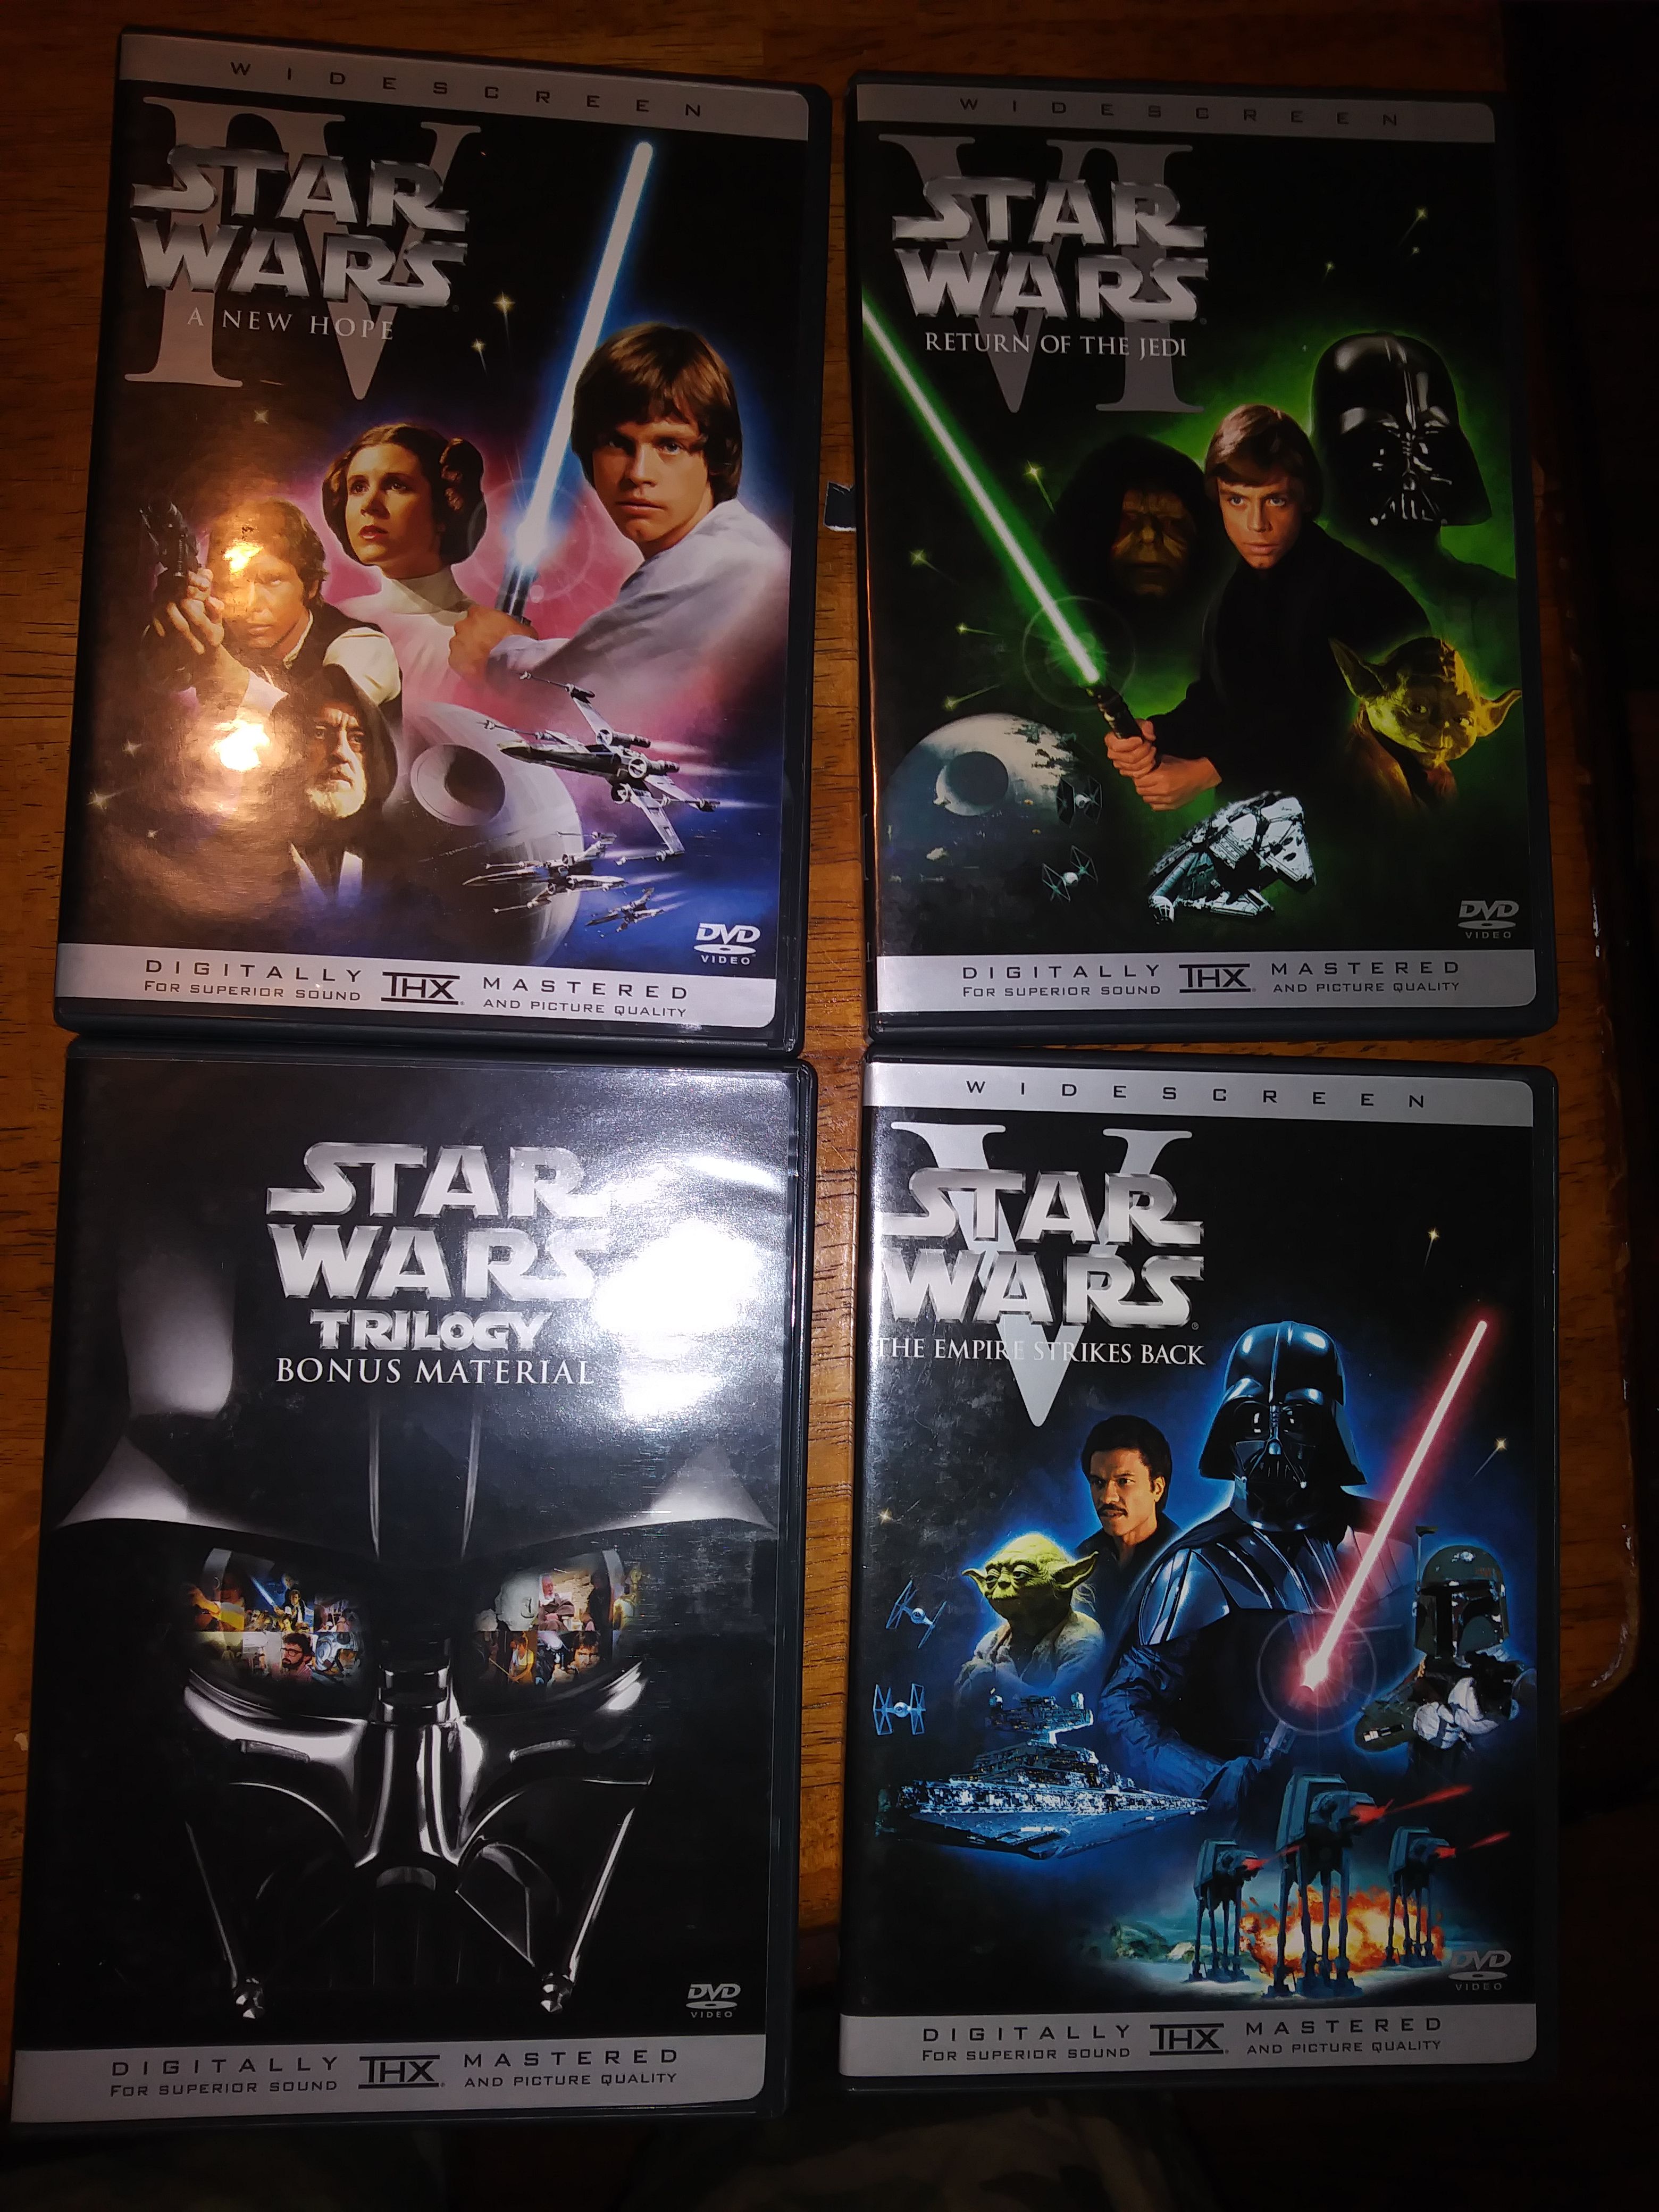 Star wars trilogy Dvd box set for in Fort TX -